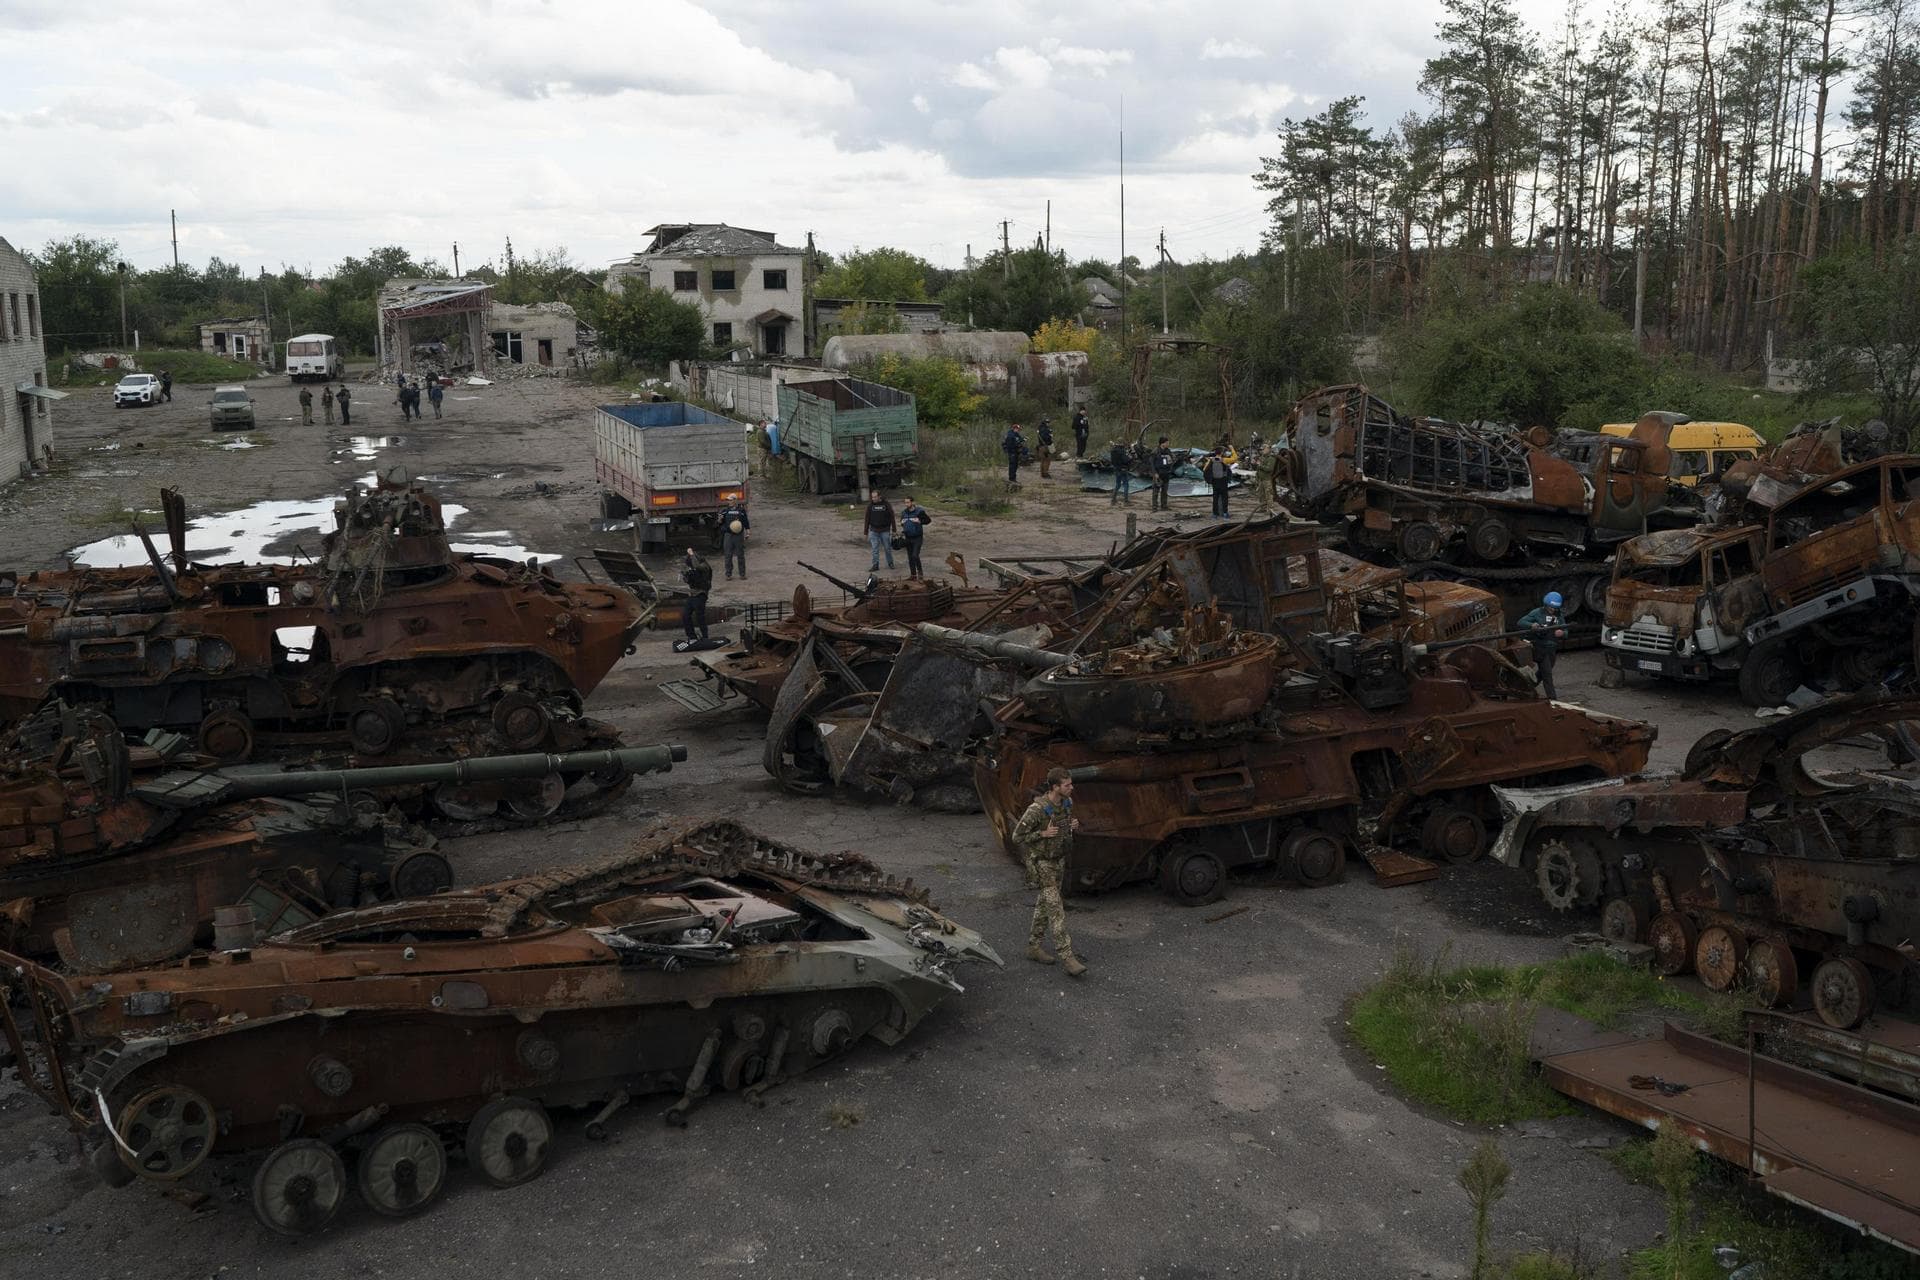 A Ukrainian serviceman and journalists walk between destroyed Russian equipment placed in an area at the recaptured town of Lyman